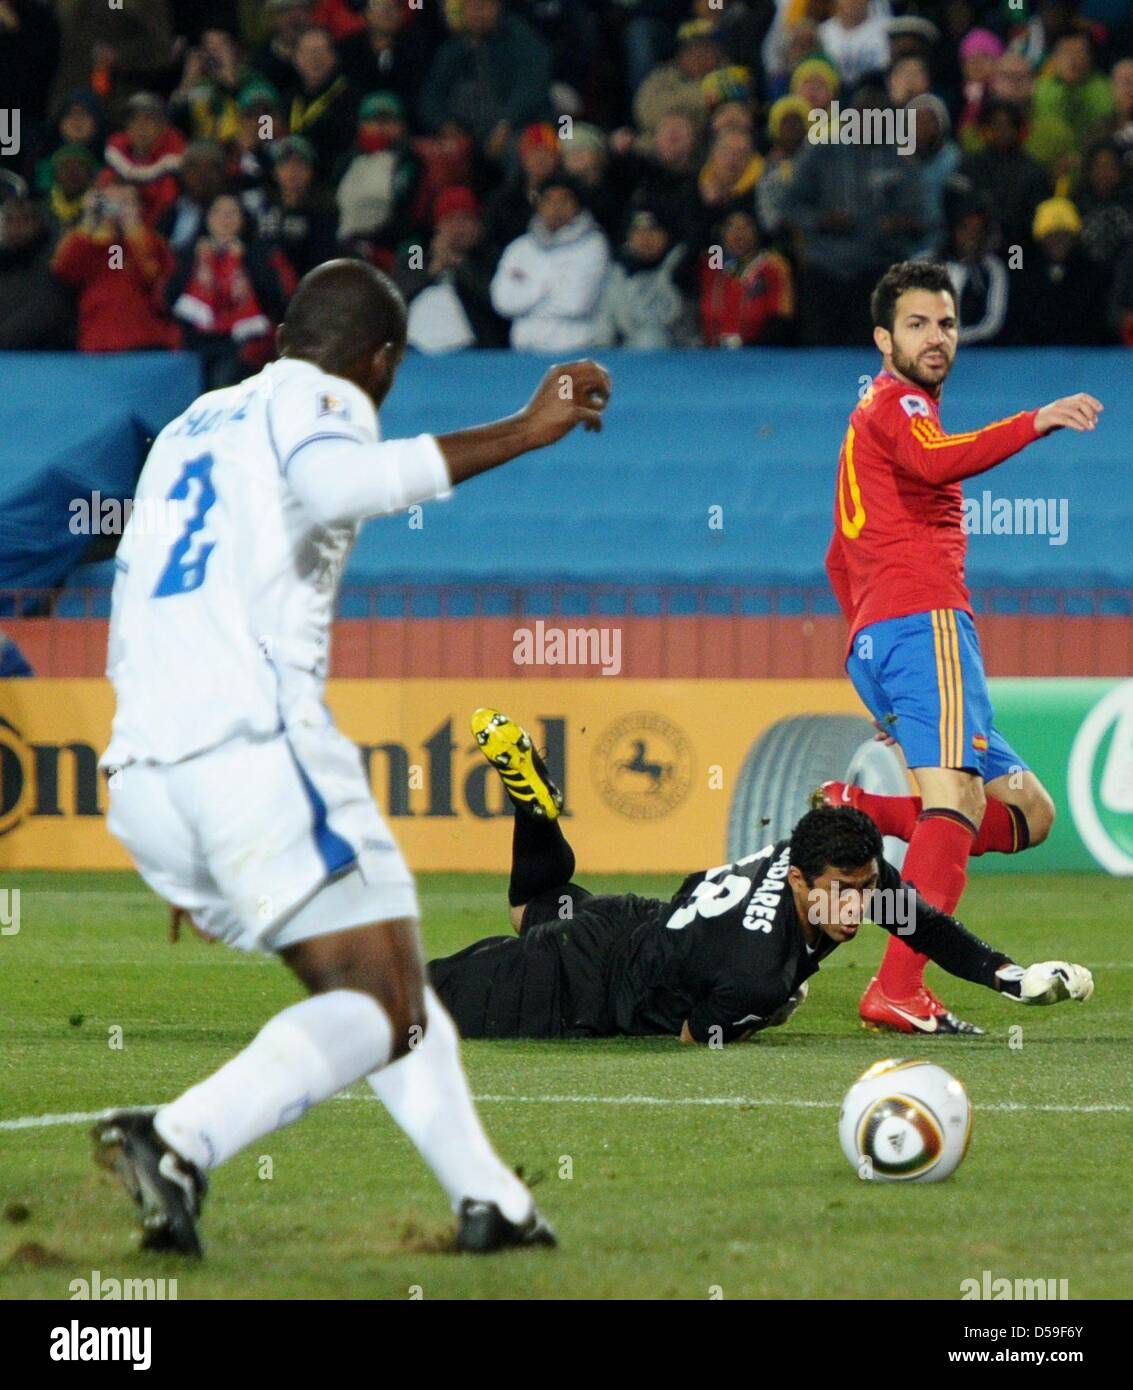 Cesc Fabregas (R) of Spain tries to score against goalkeeper Noel Valladares and Osman Chavez (L) of Honduras during the FIFA World Cup 2010 group H match between Spain and Honduras at the Ellis Park Stadium in Johannesburg, South Africa 21 June 2010. Photo: - Please refer to http://dpaq.de/FIFA-WM2010-TC  +++(c) dpa - Bildfunk+++ Stock Photo